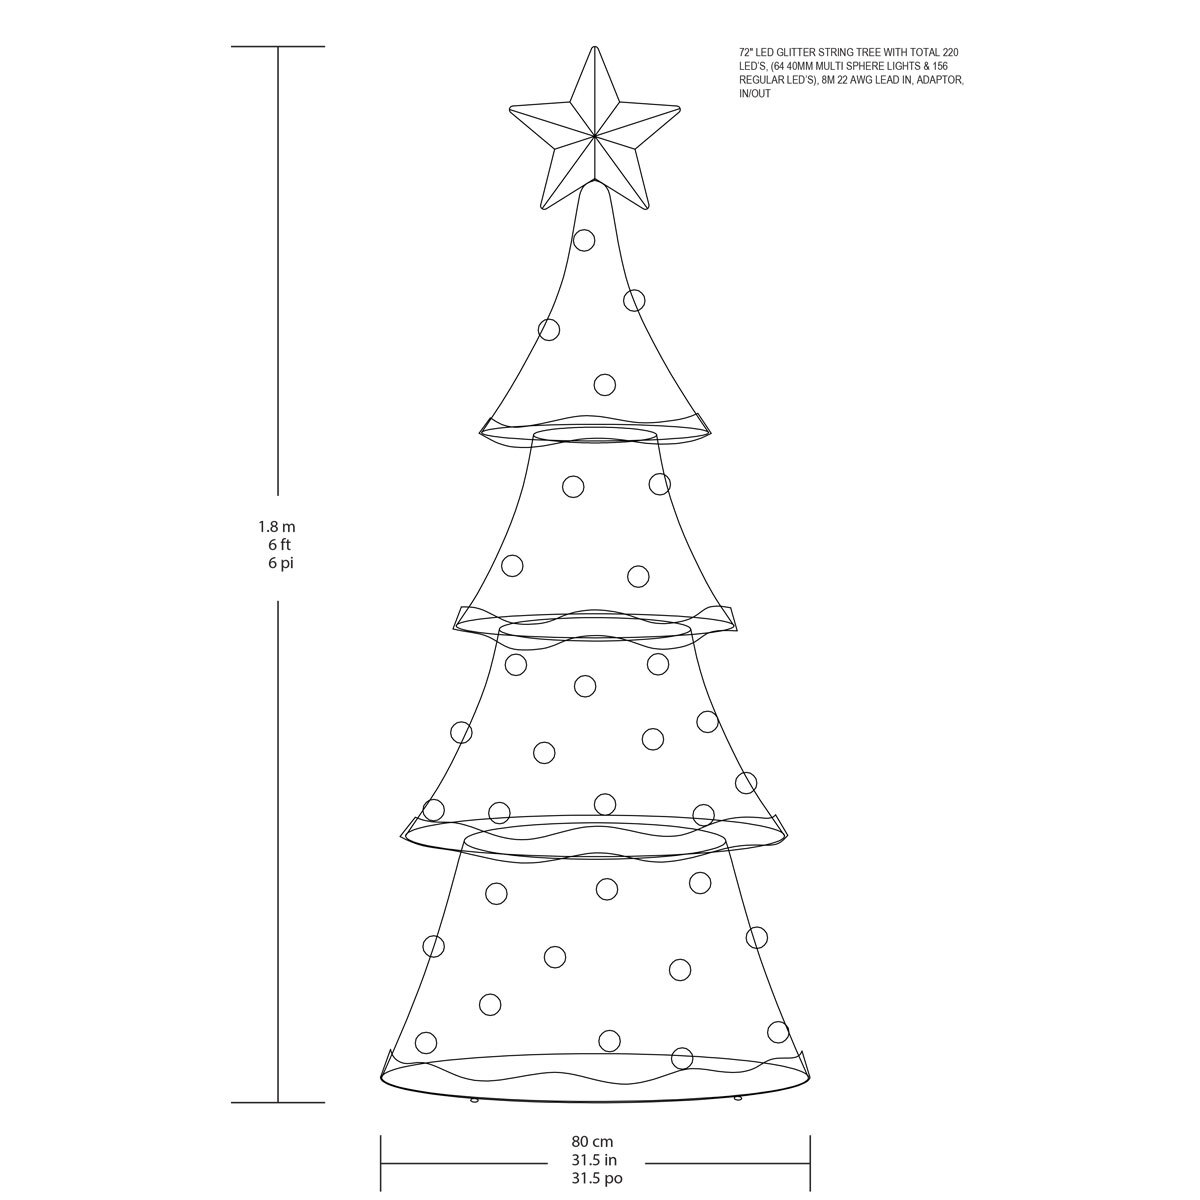 6ft LED Glitter String Tree Dimensions Image at Costco.co.uk